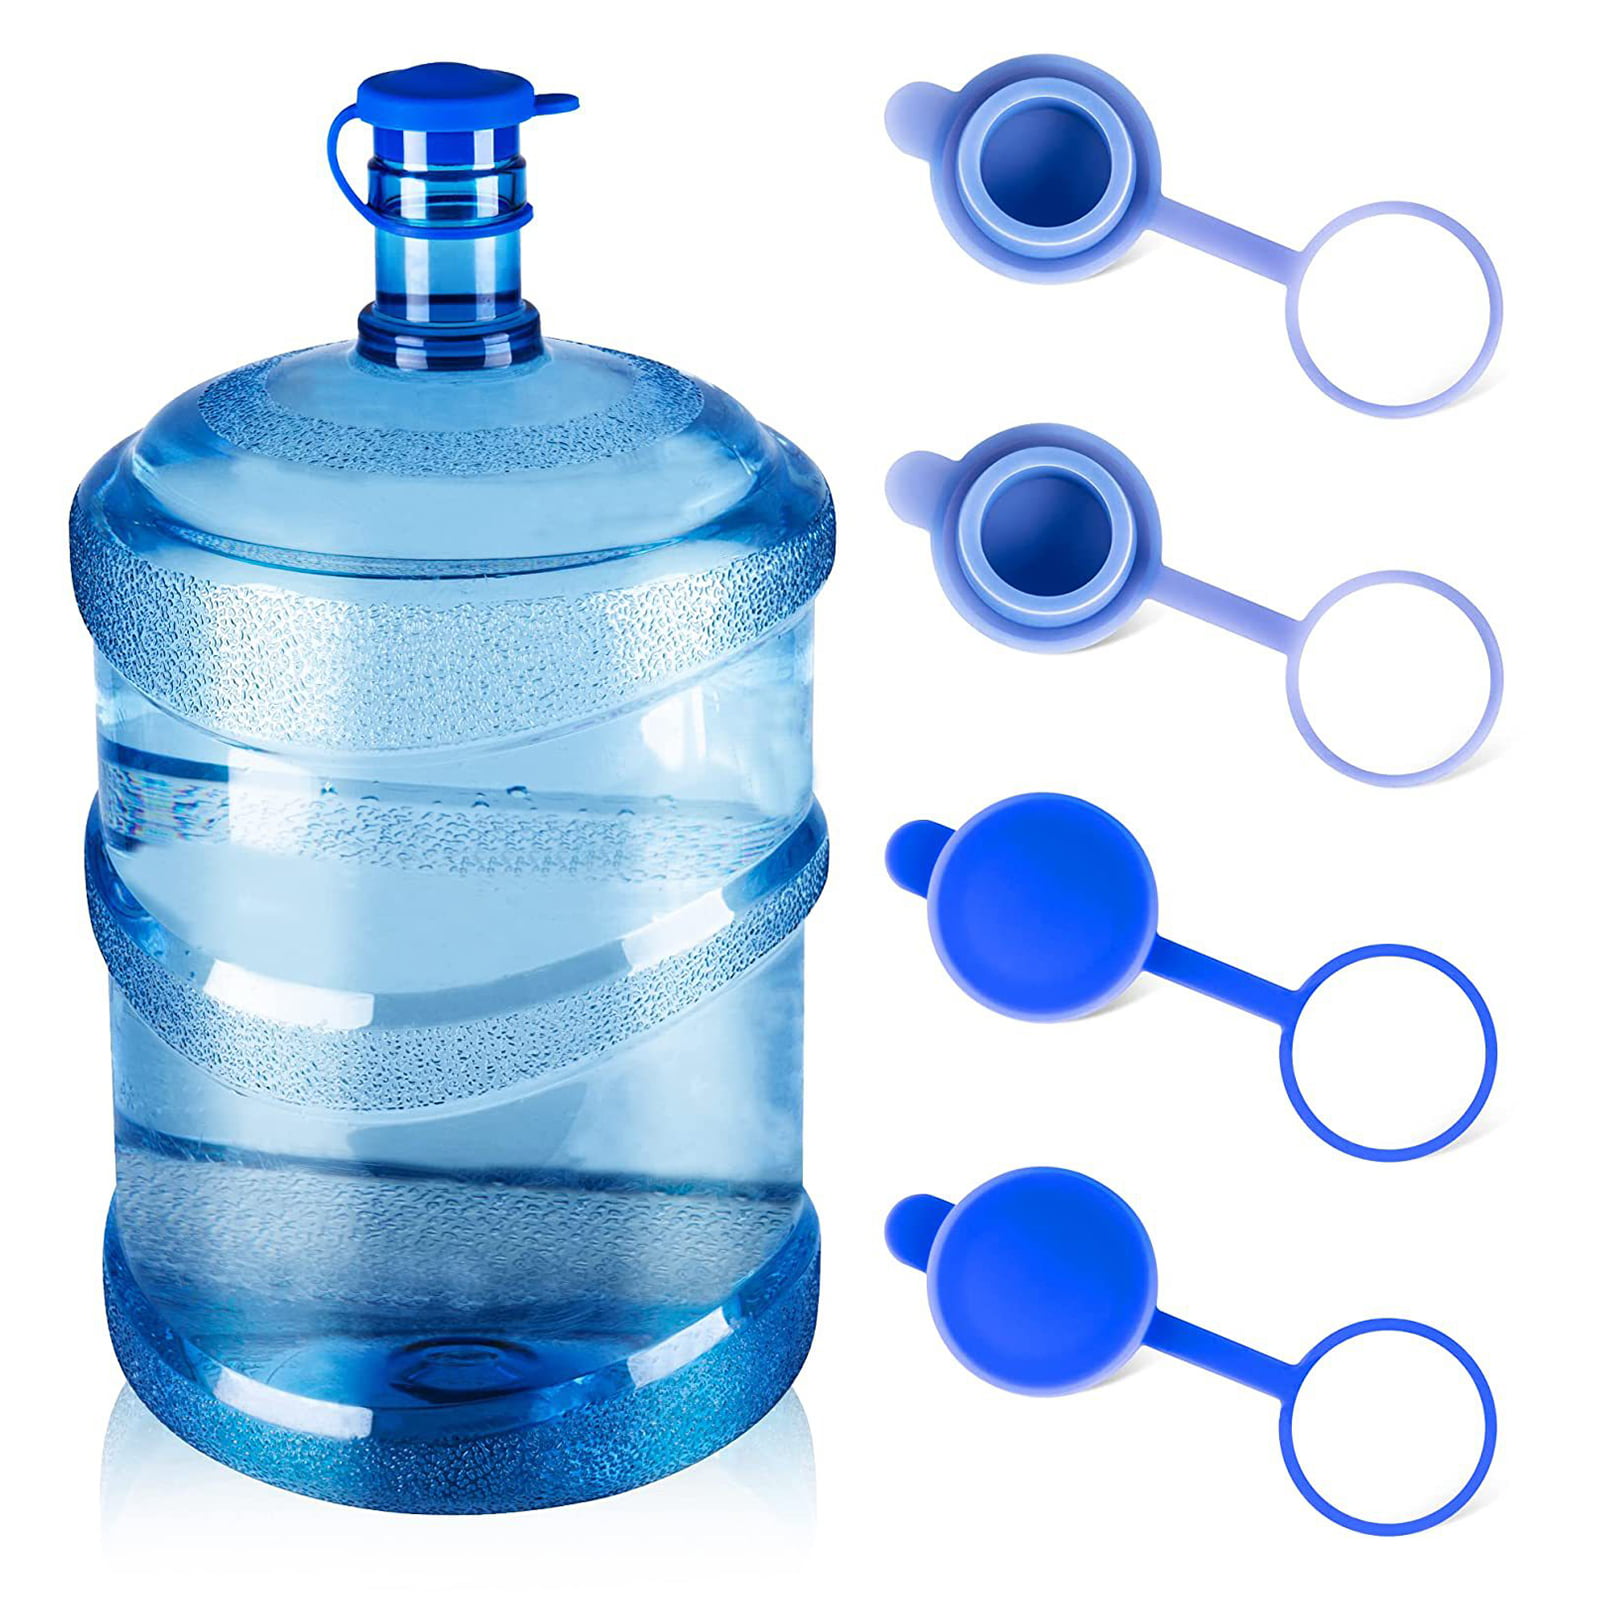 5 gallon Water Jug Cap,55mm Water Bottle Caps 5 Gallon Non Spill Caps with Water Bottle Handle for Screw Top Bottles 5Pack 